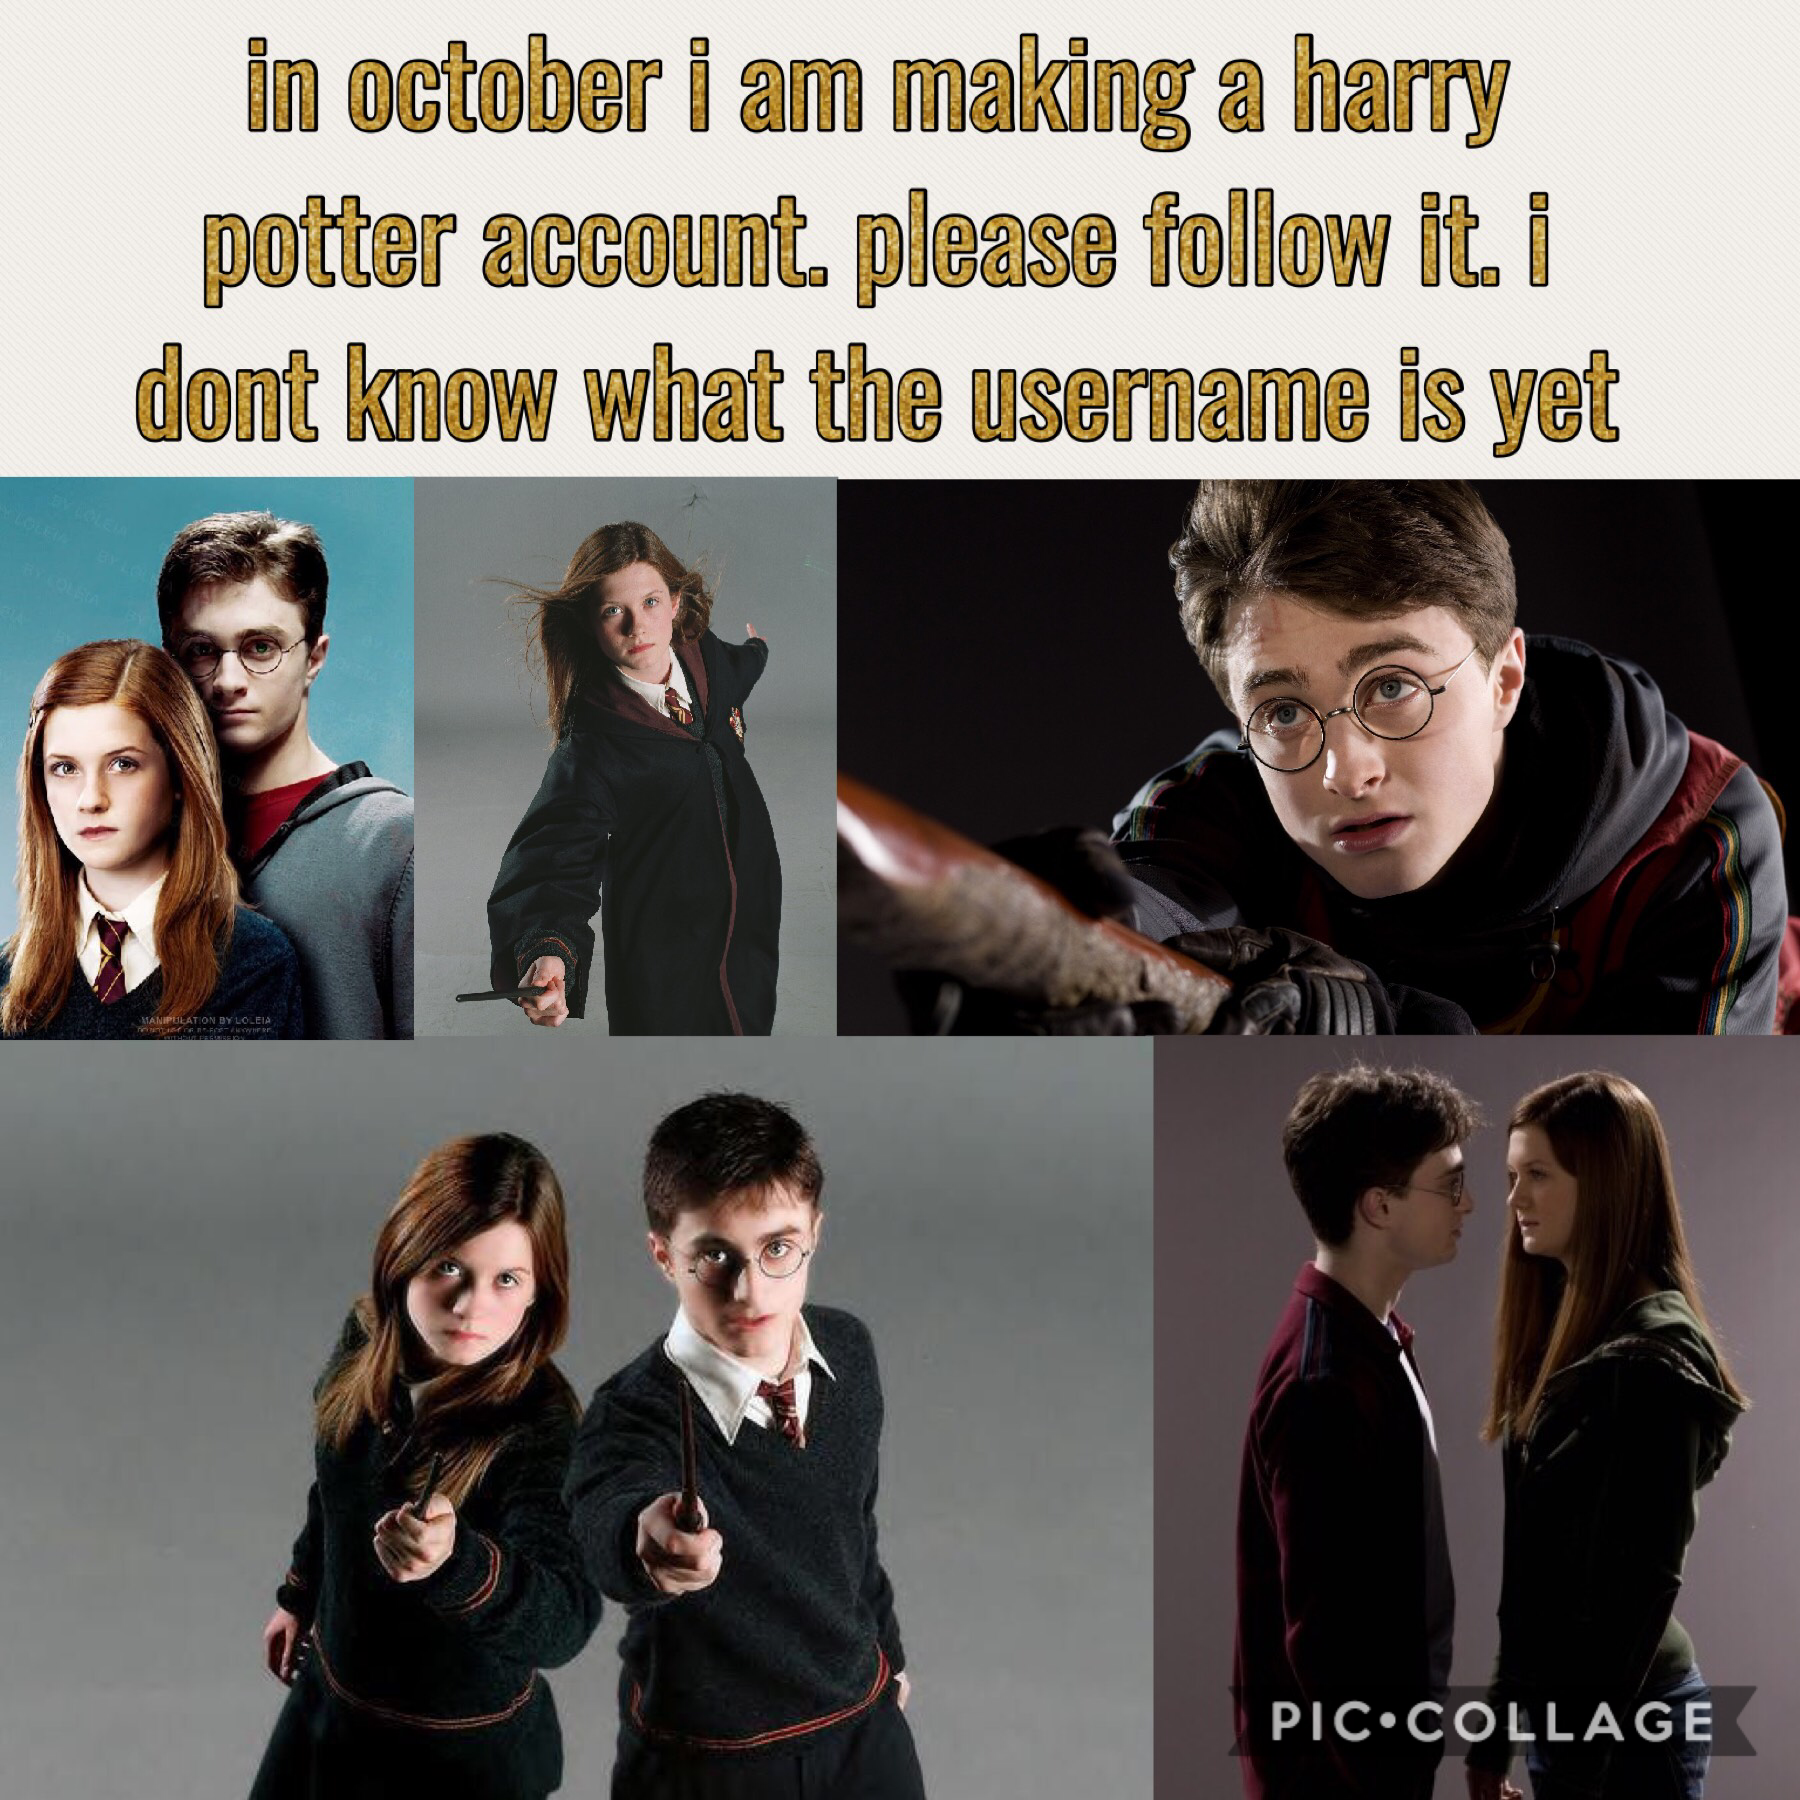 Harry potter account coming october